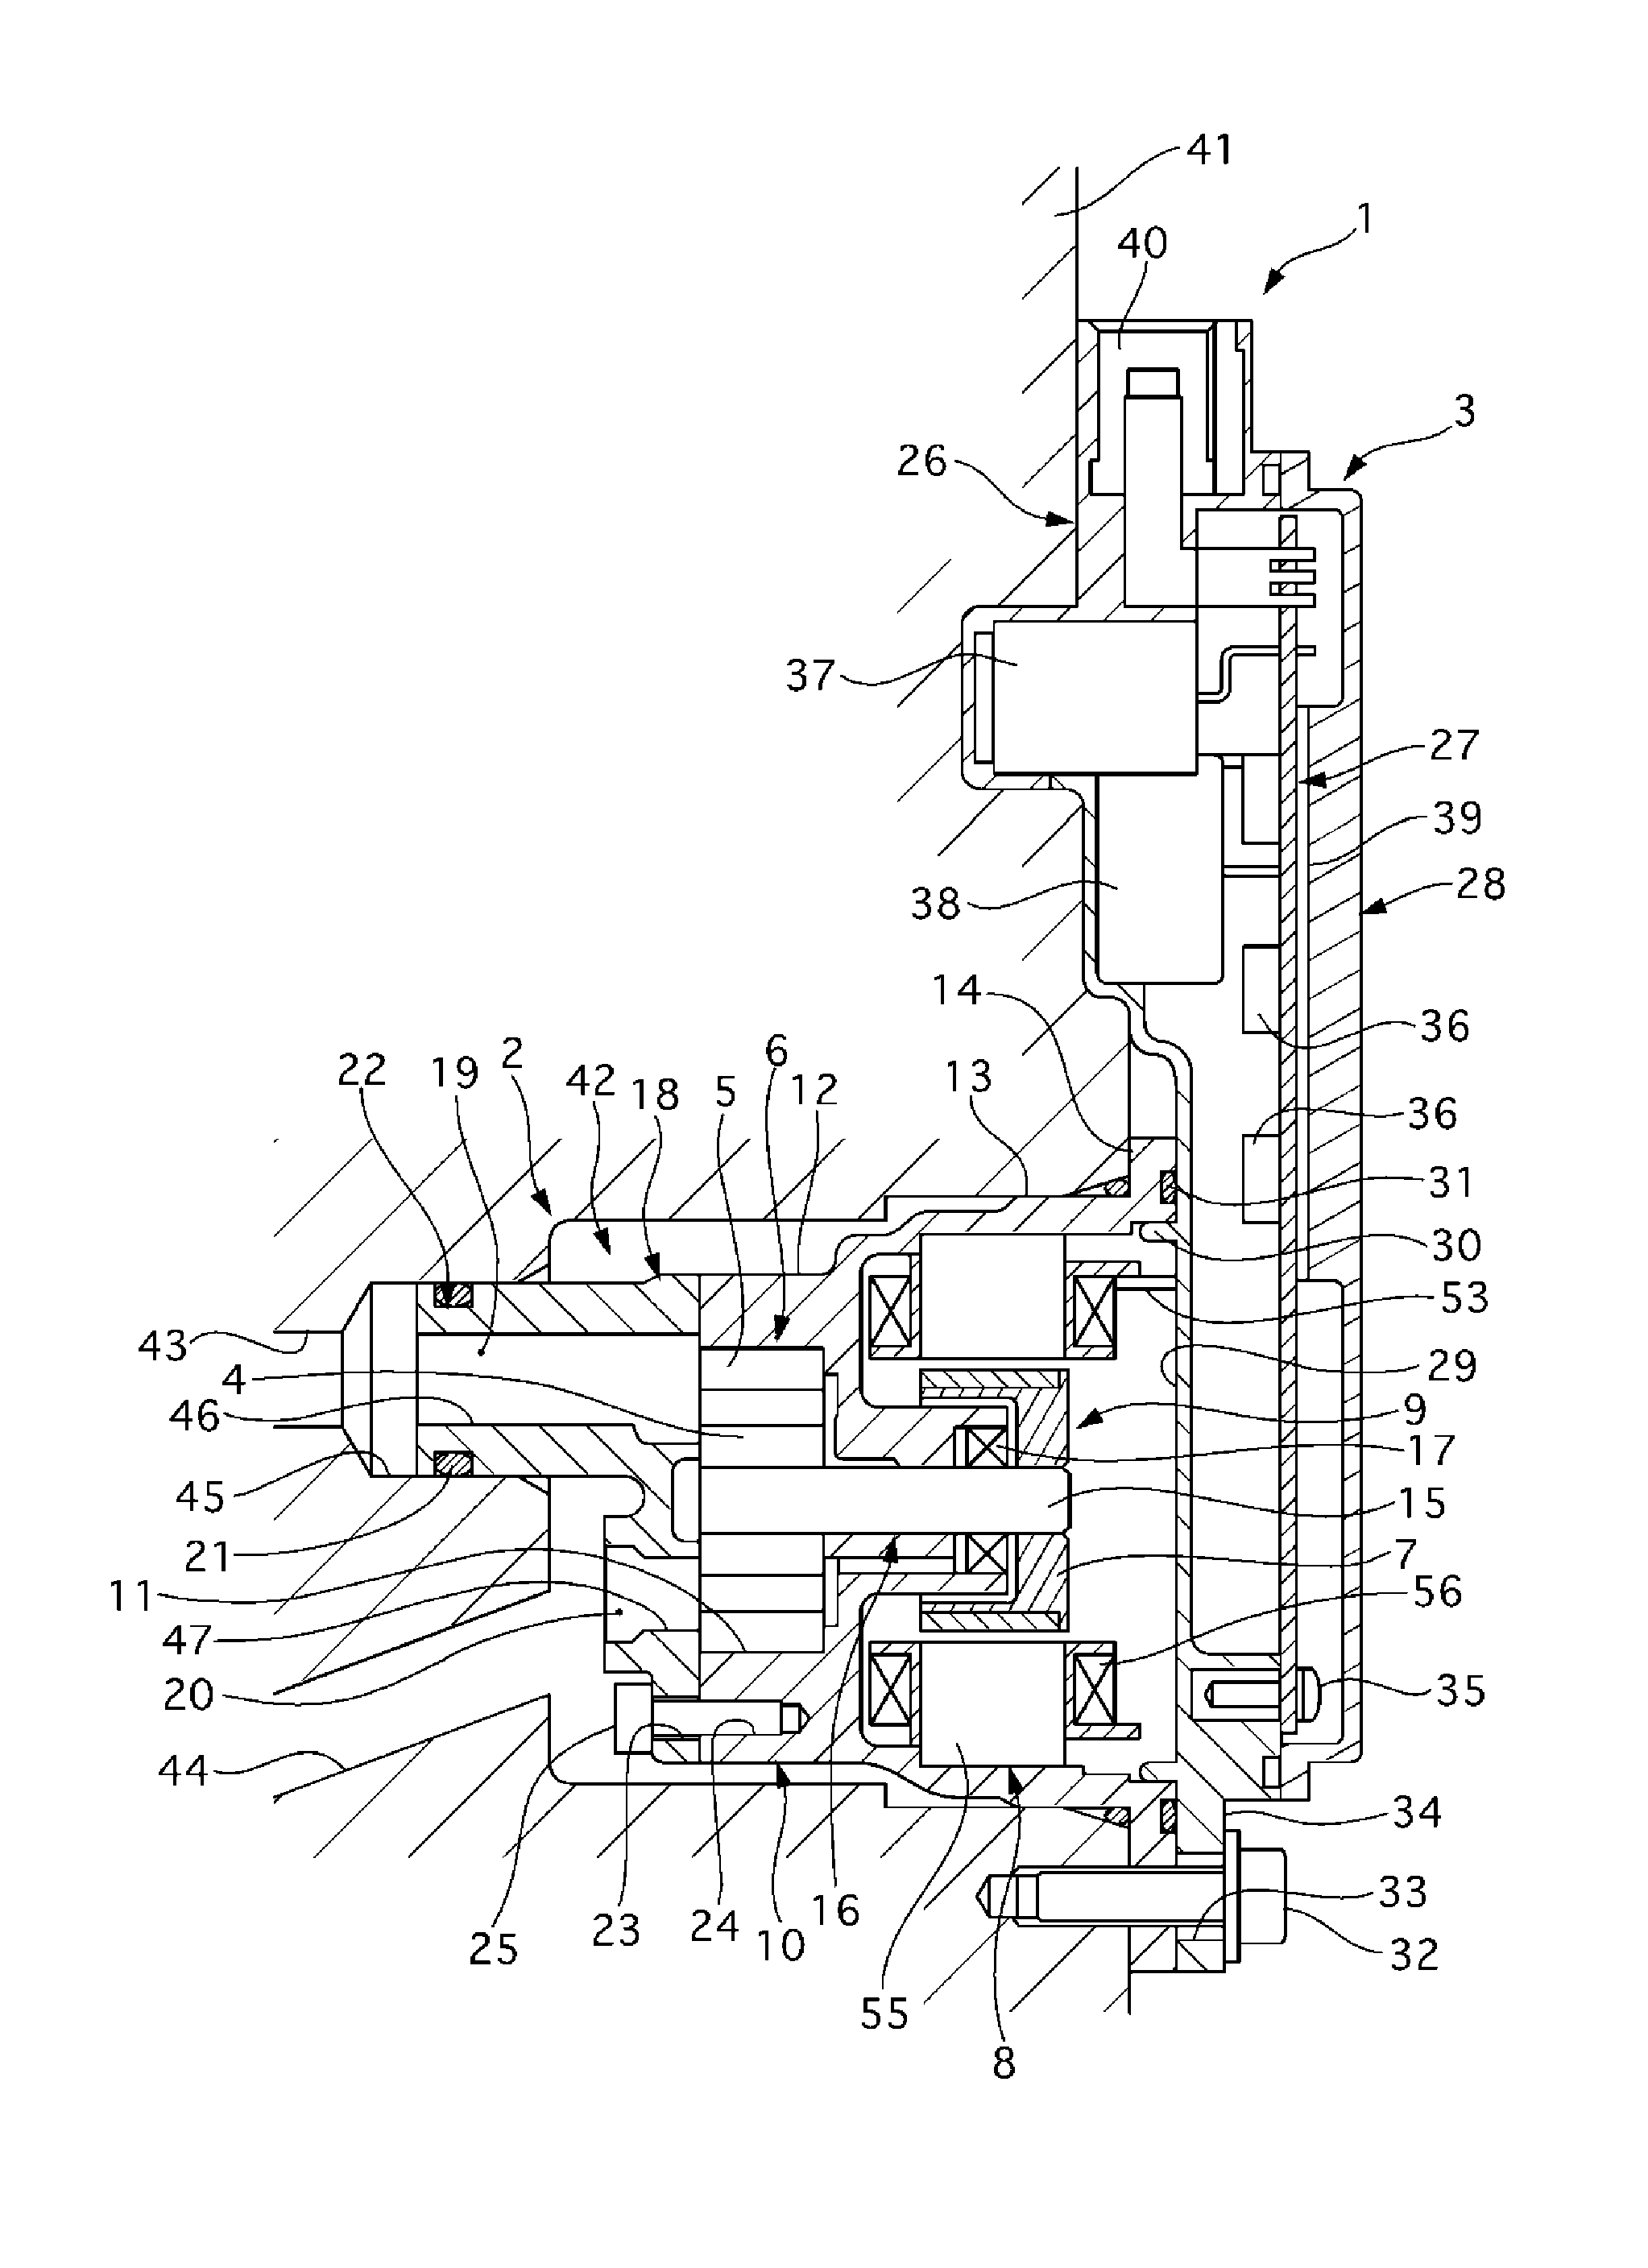 Mechanical and Electrical-Integrated Drive Unit